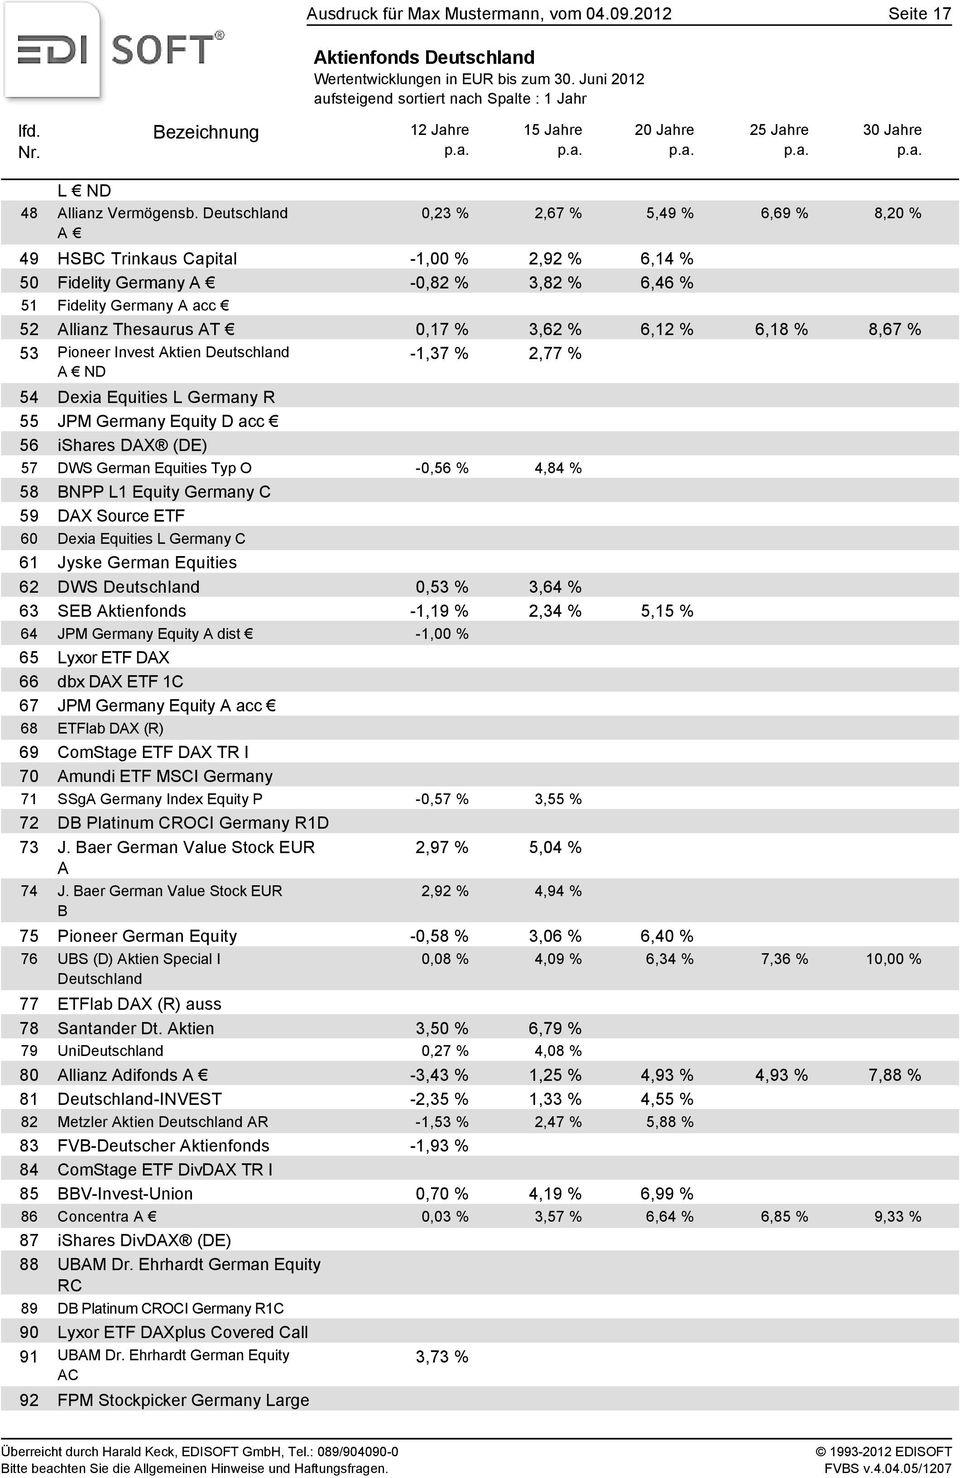 3,62 % 6,12 % 6,18 % 8,67 % 53 Pioneer Invest Aktien Deutschland -1,37 % 2,77 % A ND 54 Dexia Equities L Germany R 55 JPM Germany Equity D acc 56 ishares DAX (DE) 57 DWS German Equities Typ O -0,56 %